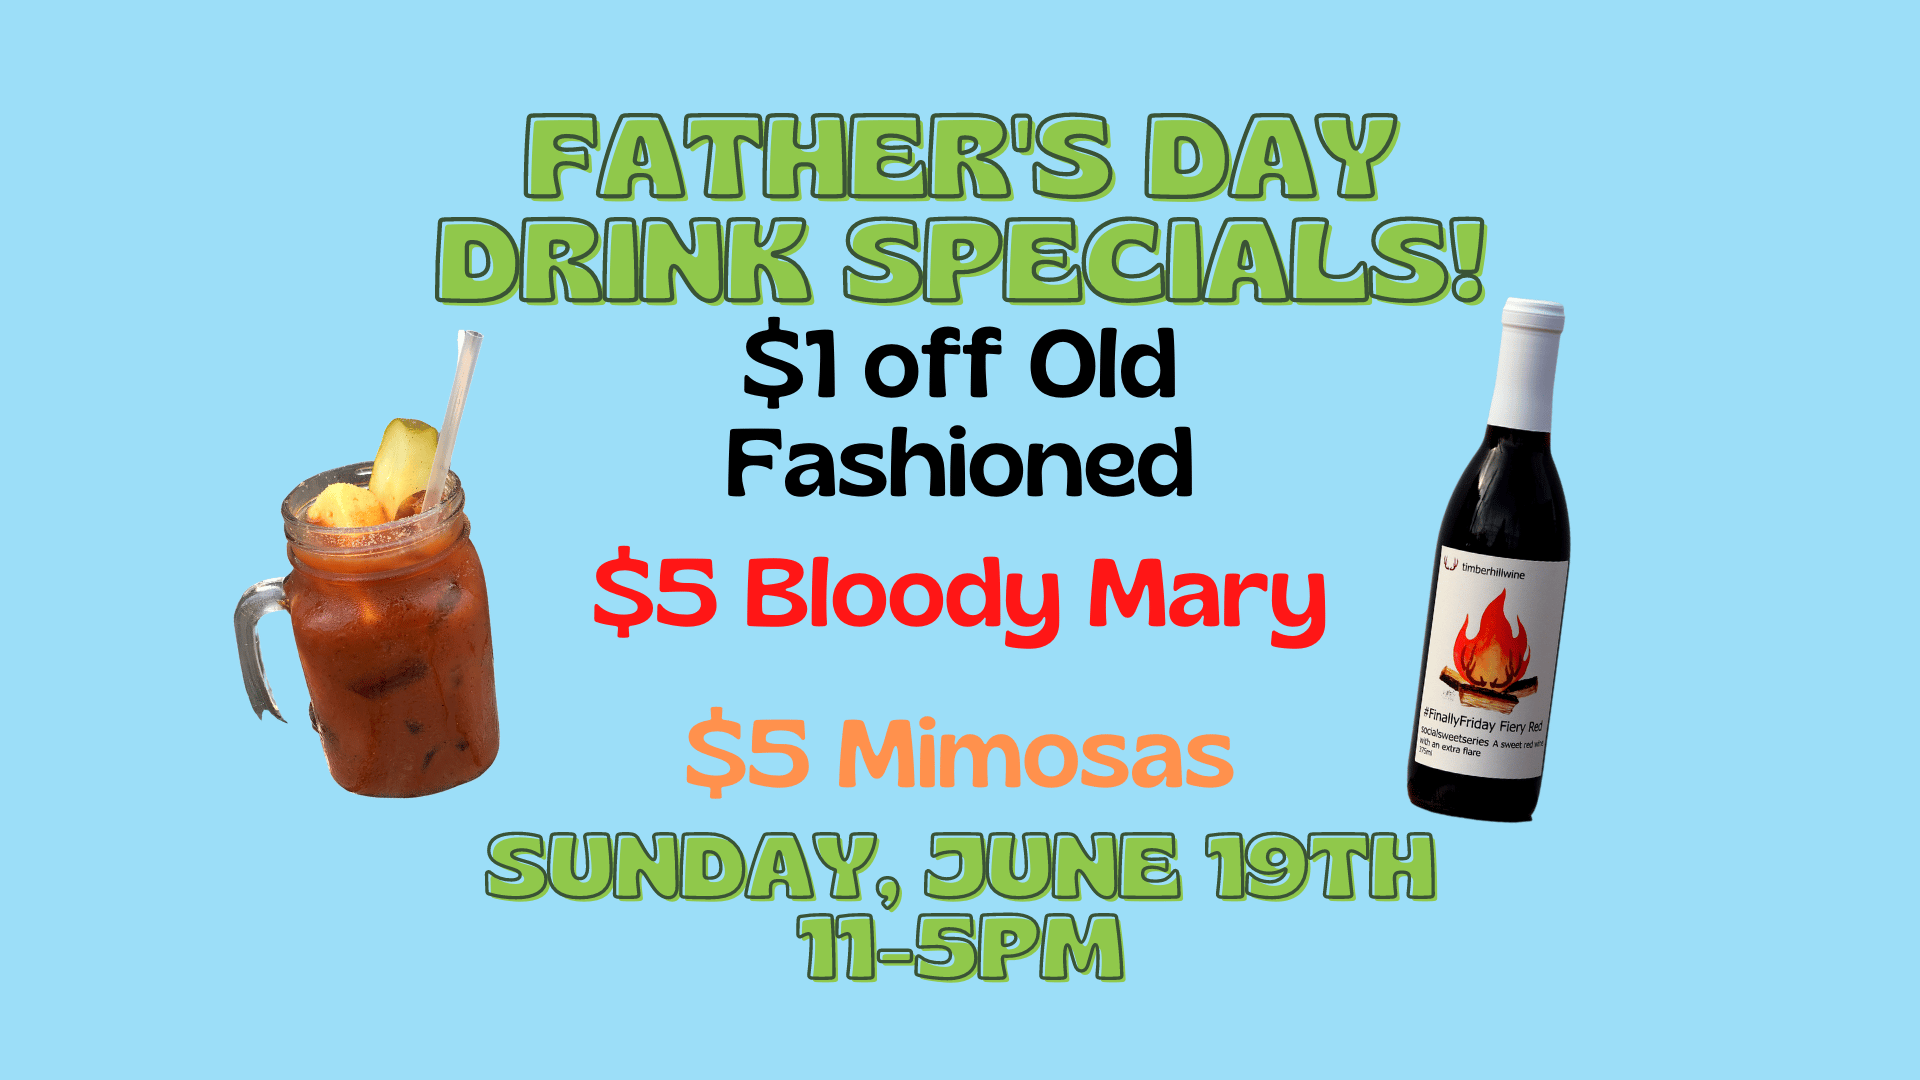 Father's Day Drink Specials at Timber Hill